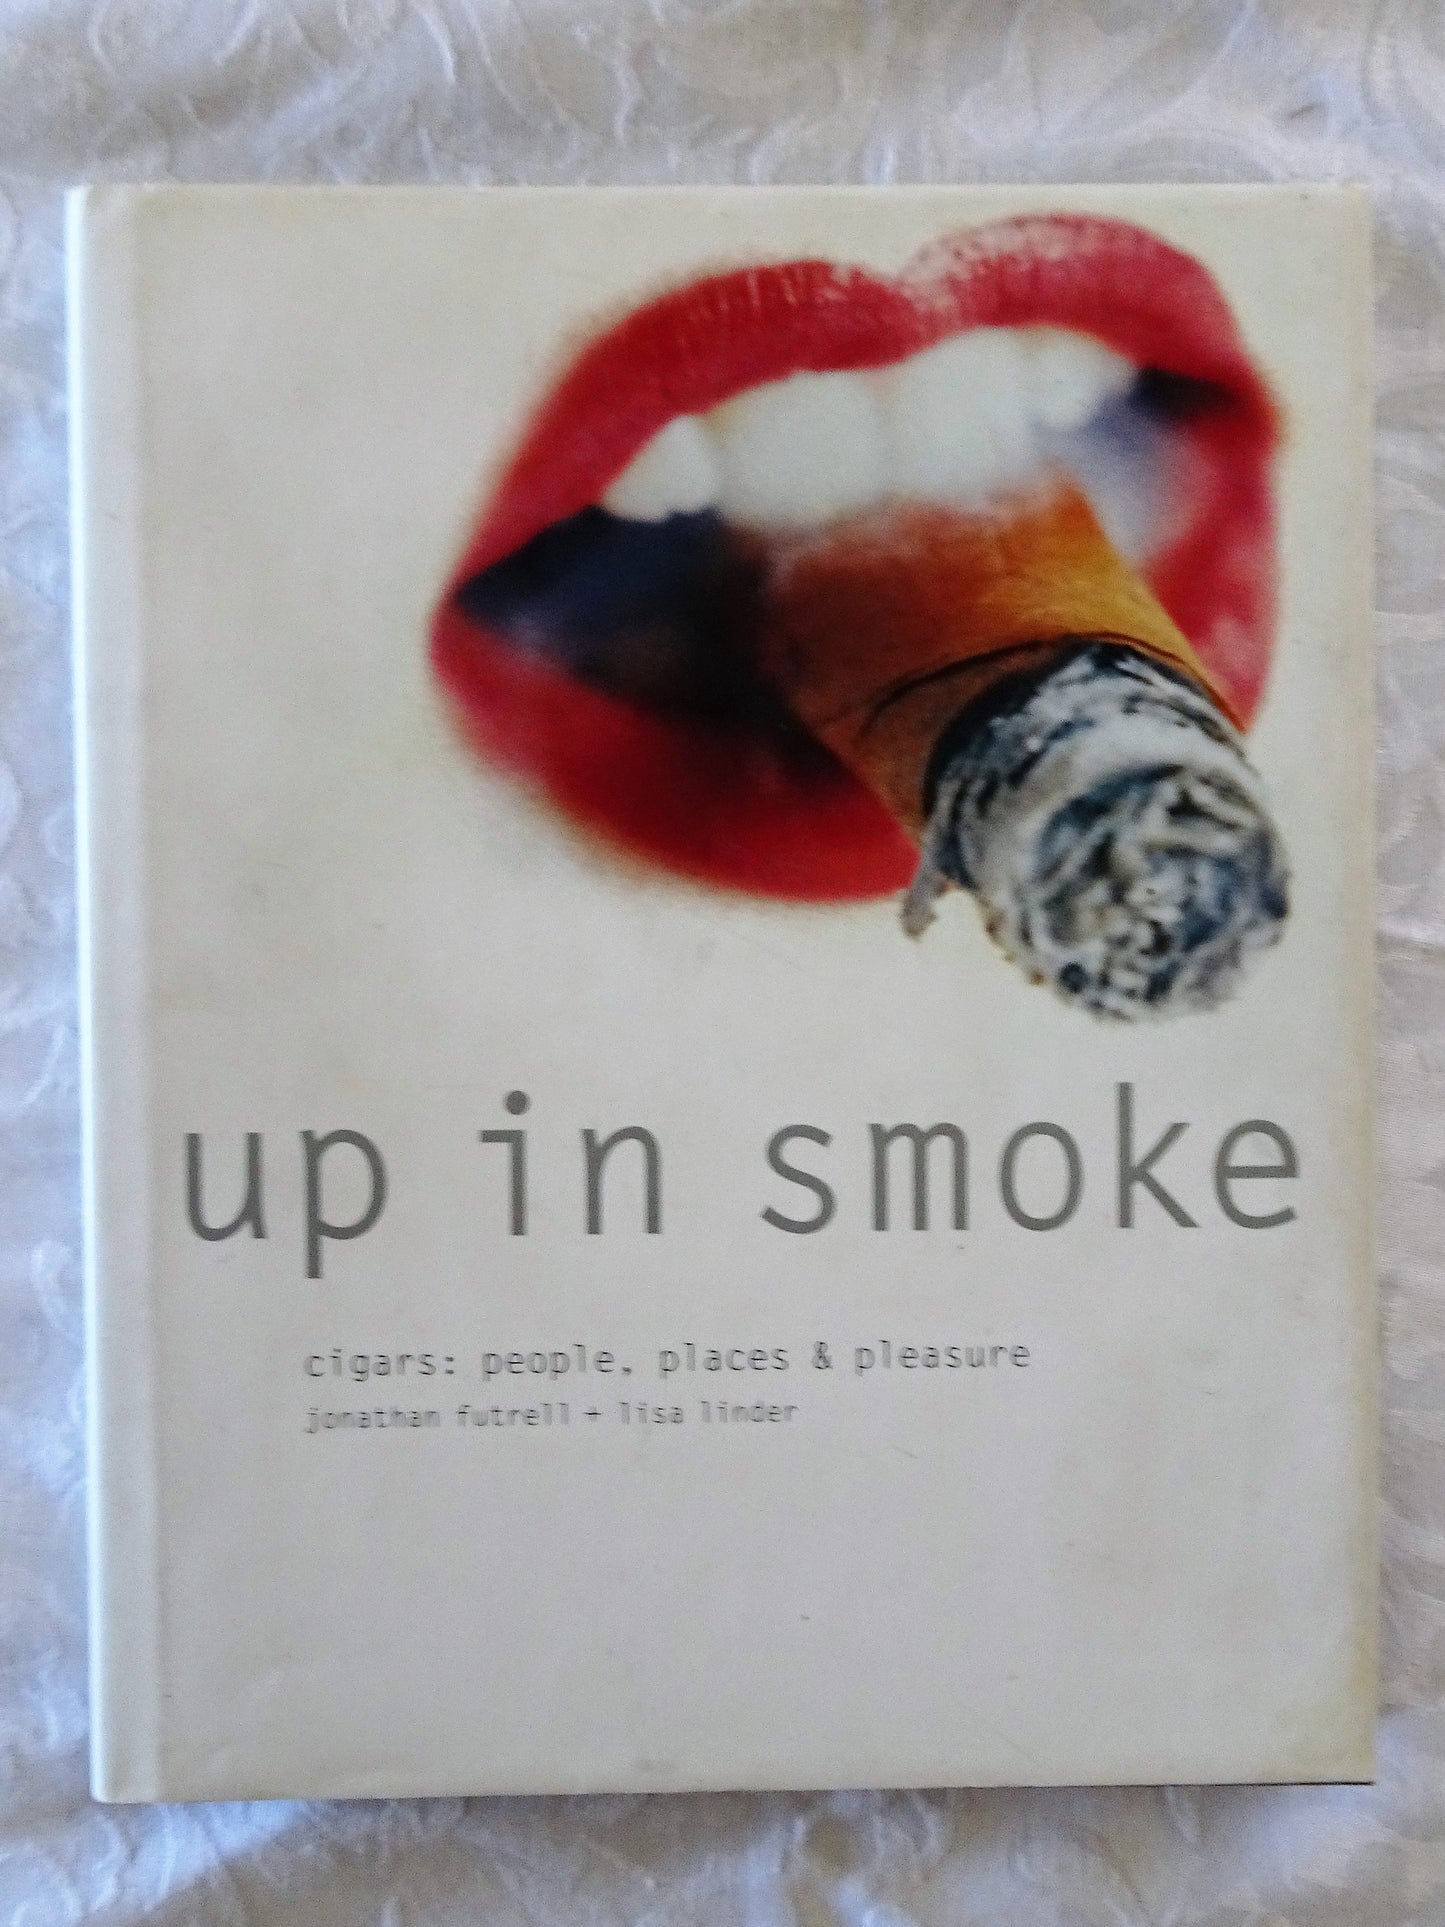 Up In Smoke by Jonathan Futrell and Lisa linder